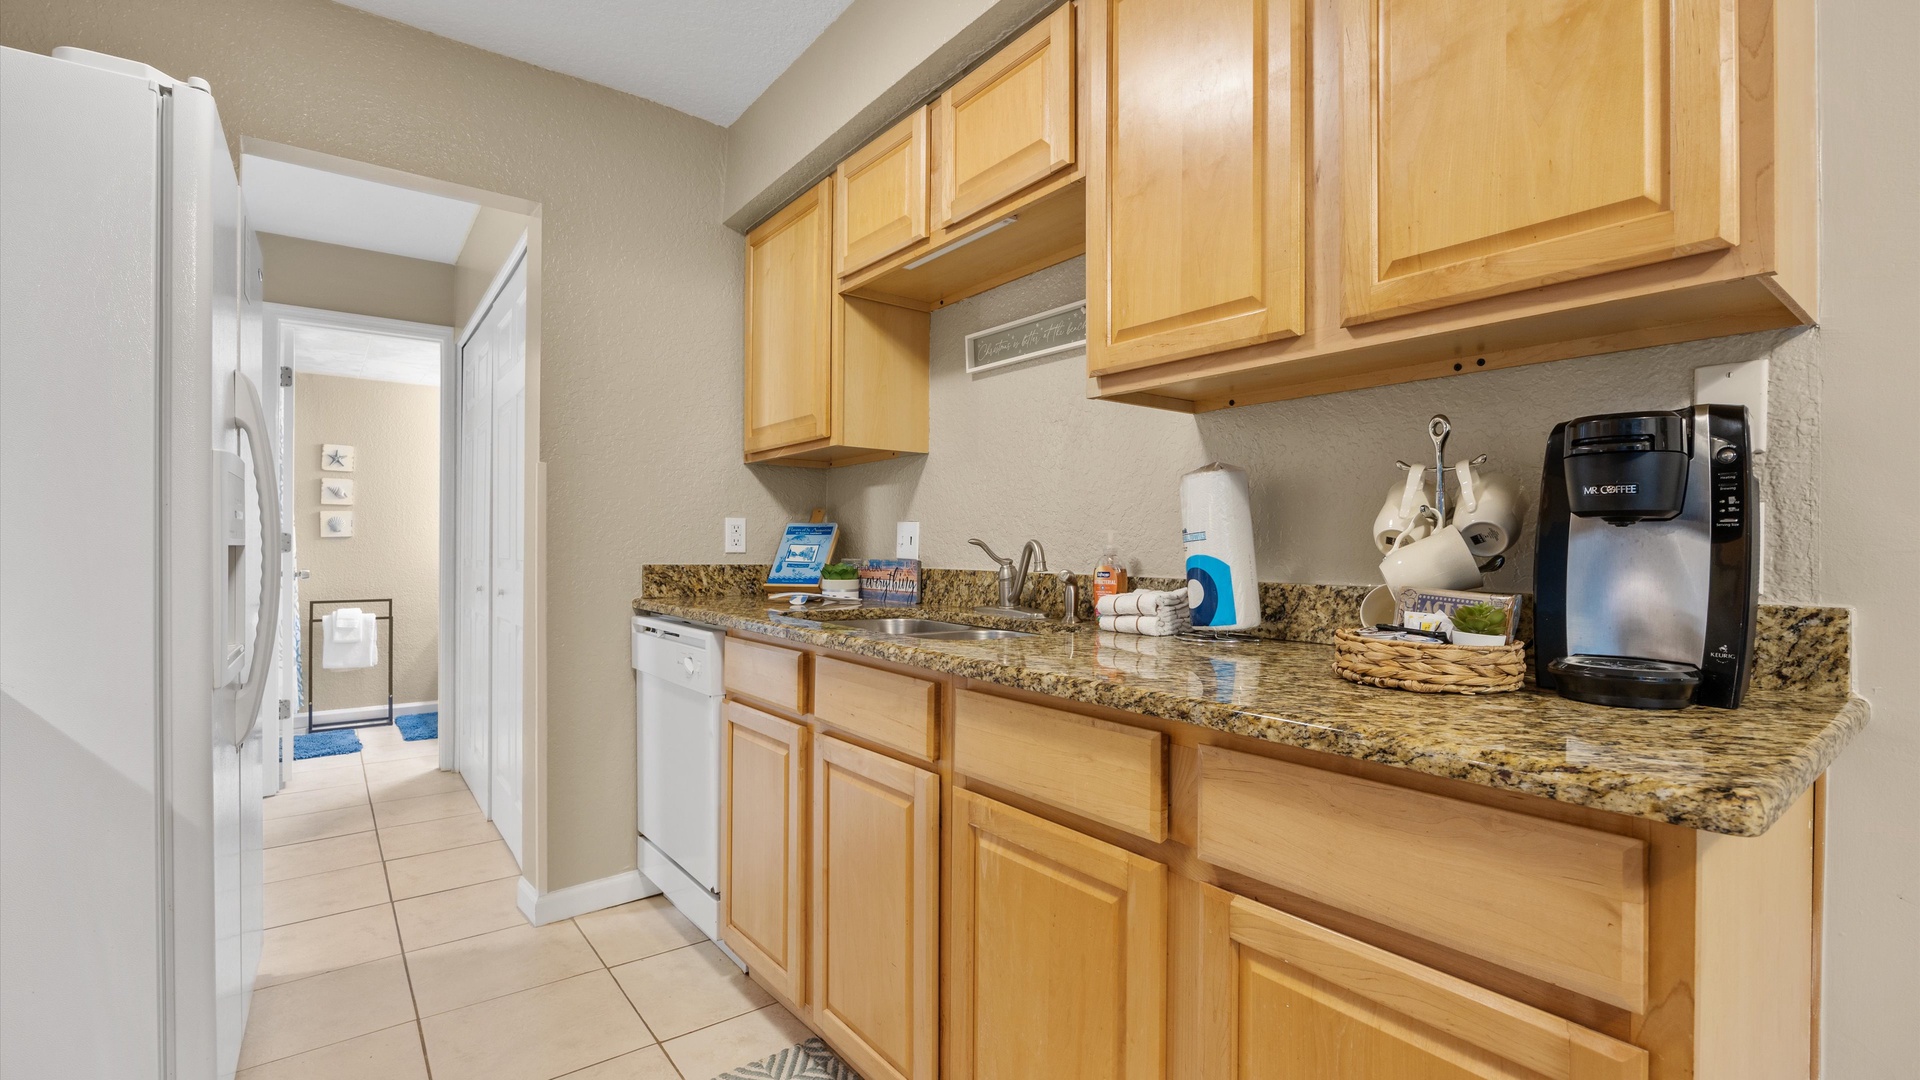 The kitchen offers ample space & all the comforts of home